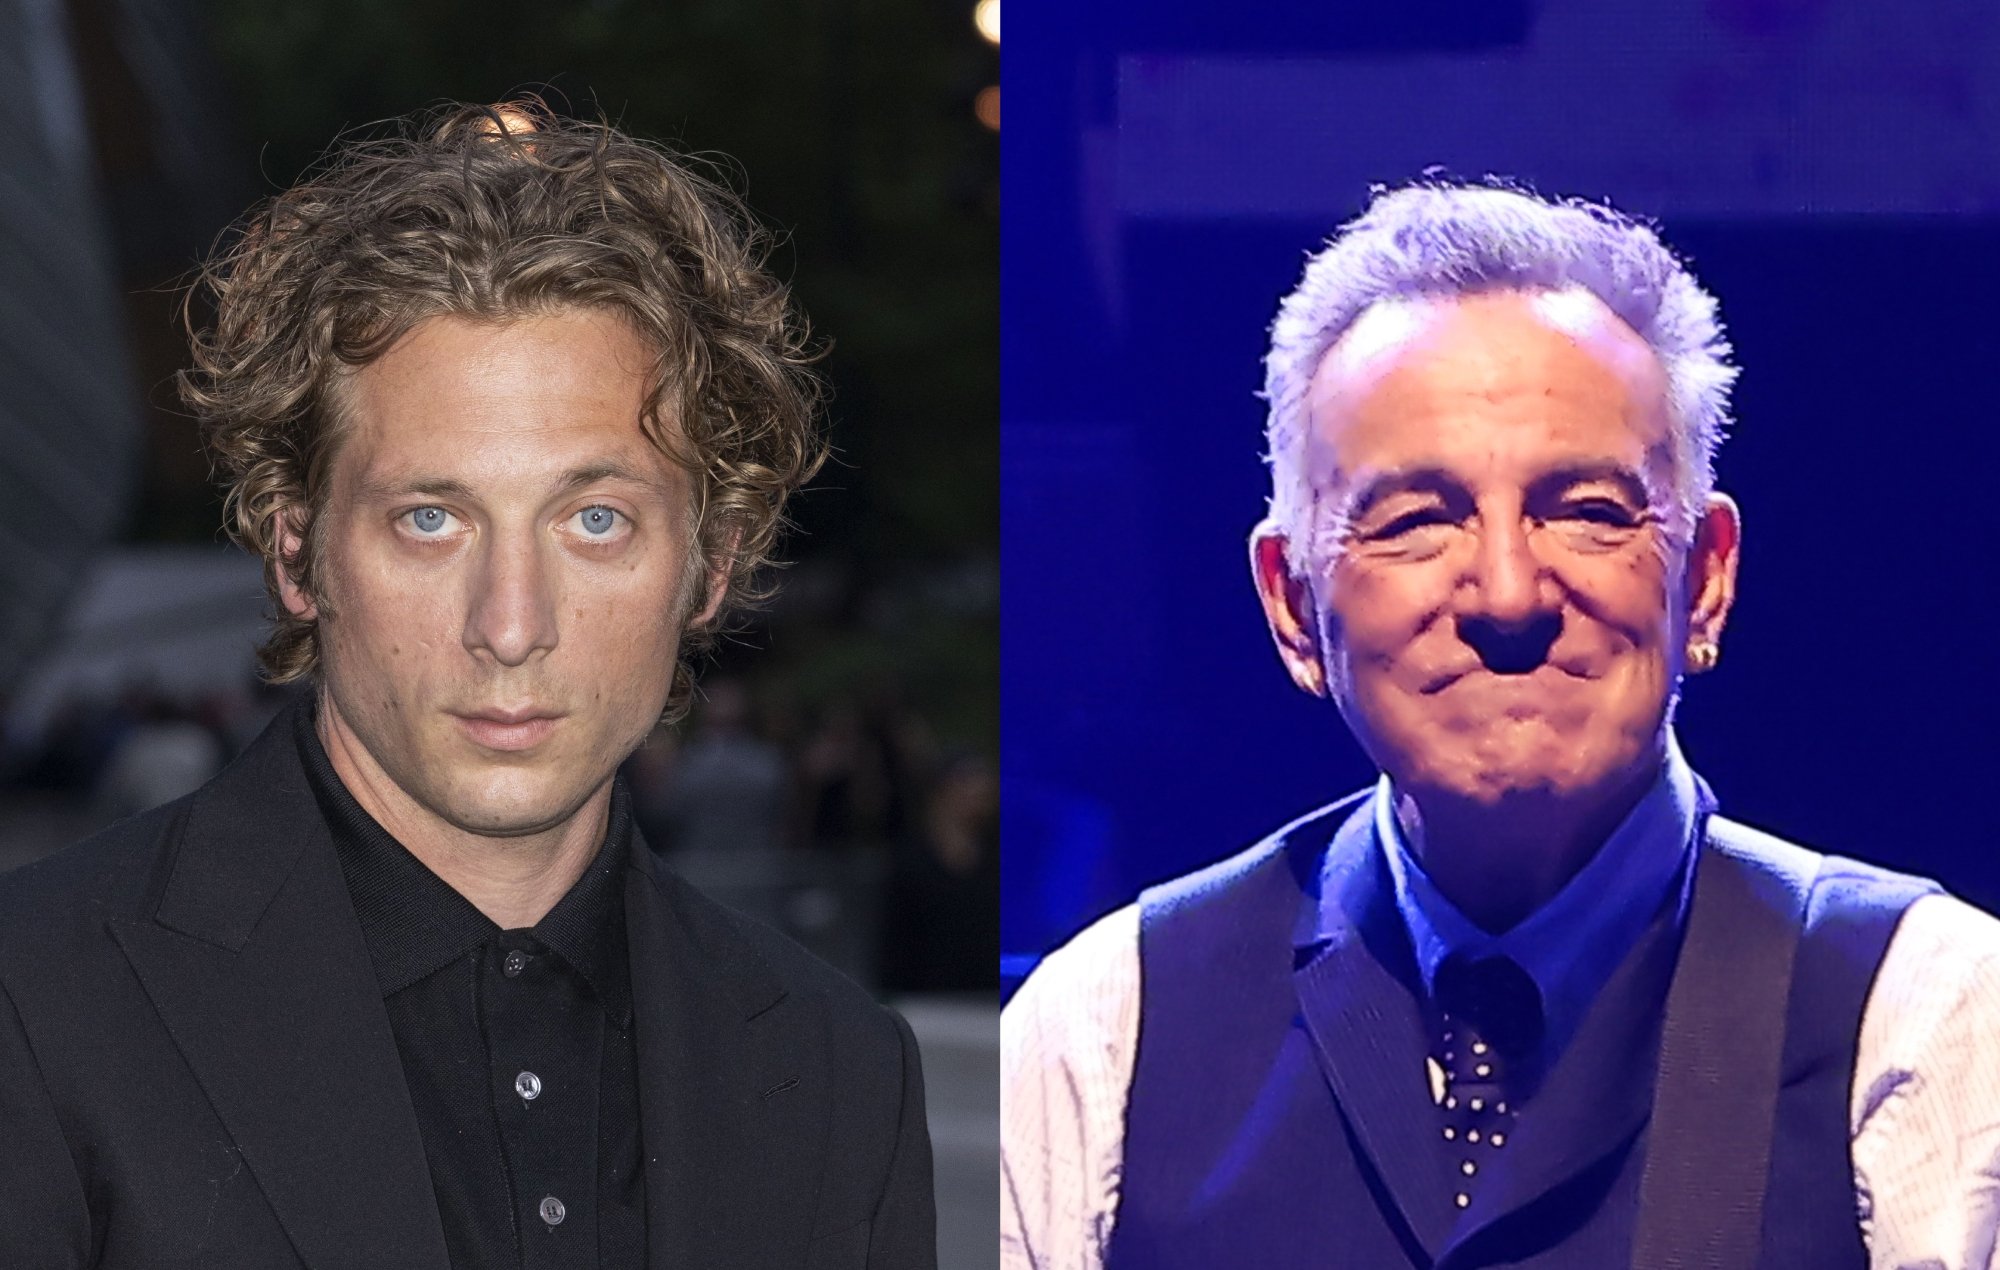 Jeremy Allen White has been texting Bruce Springsteen and hopes to meet in London in preparation of playing him in biopic